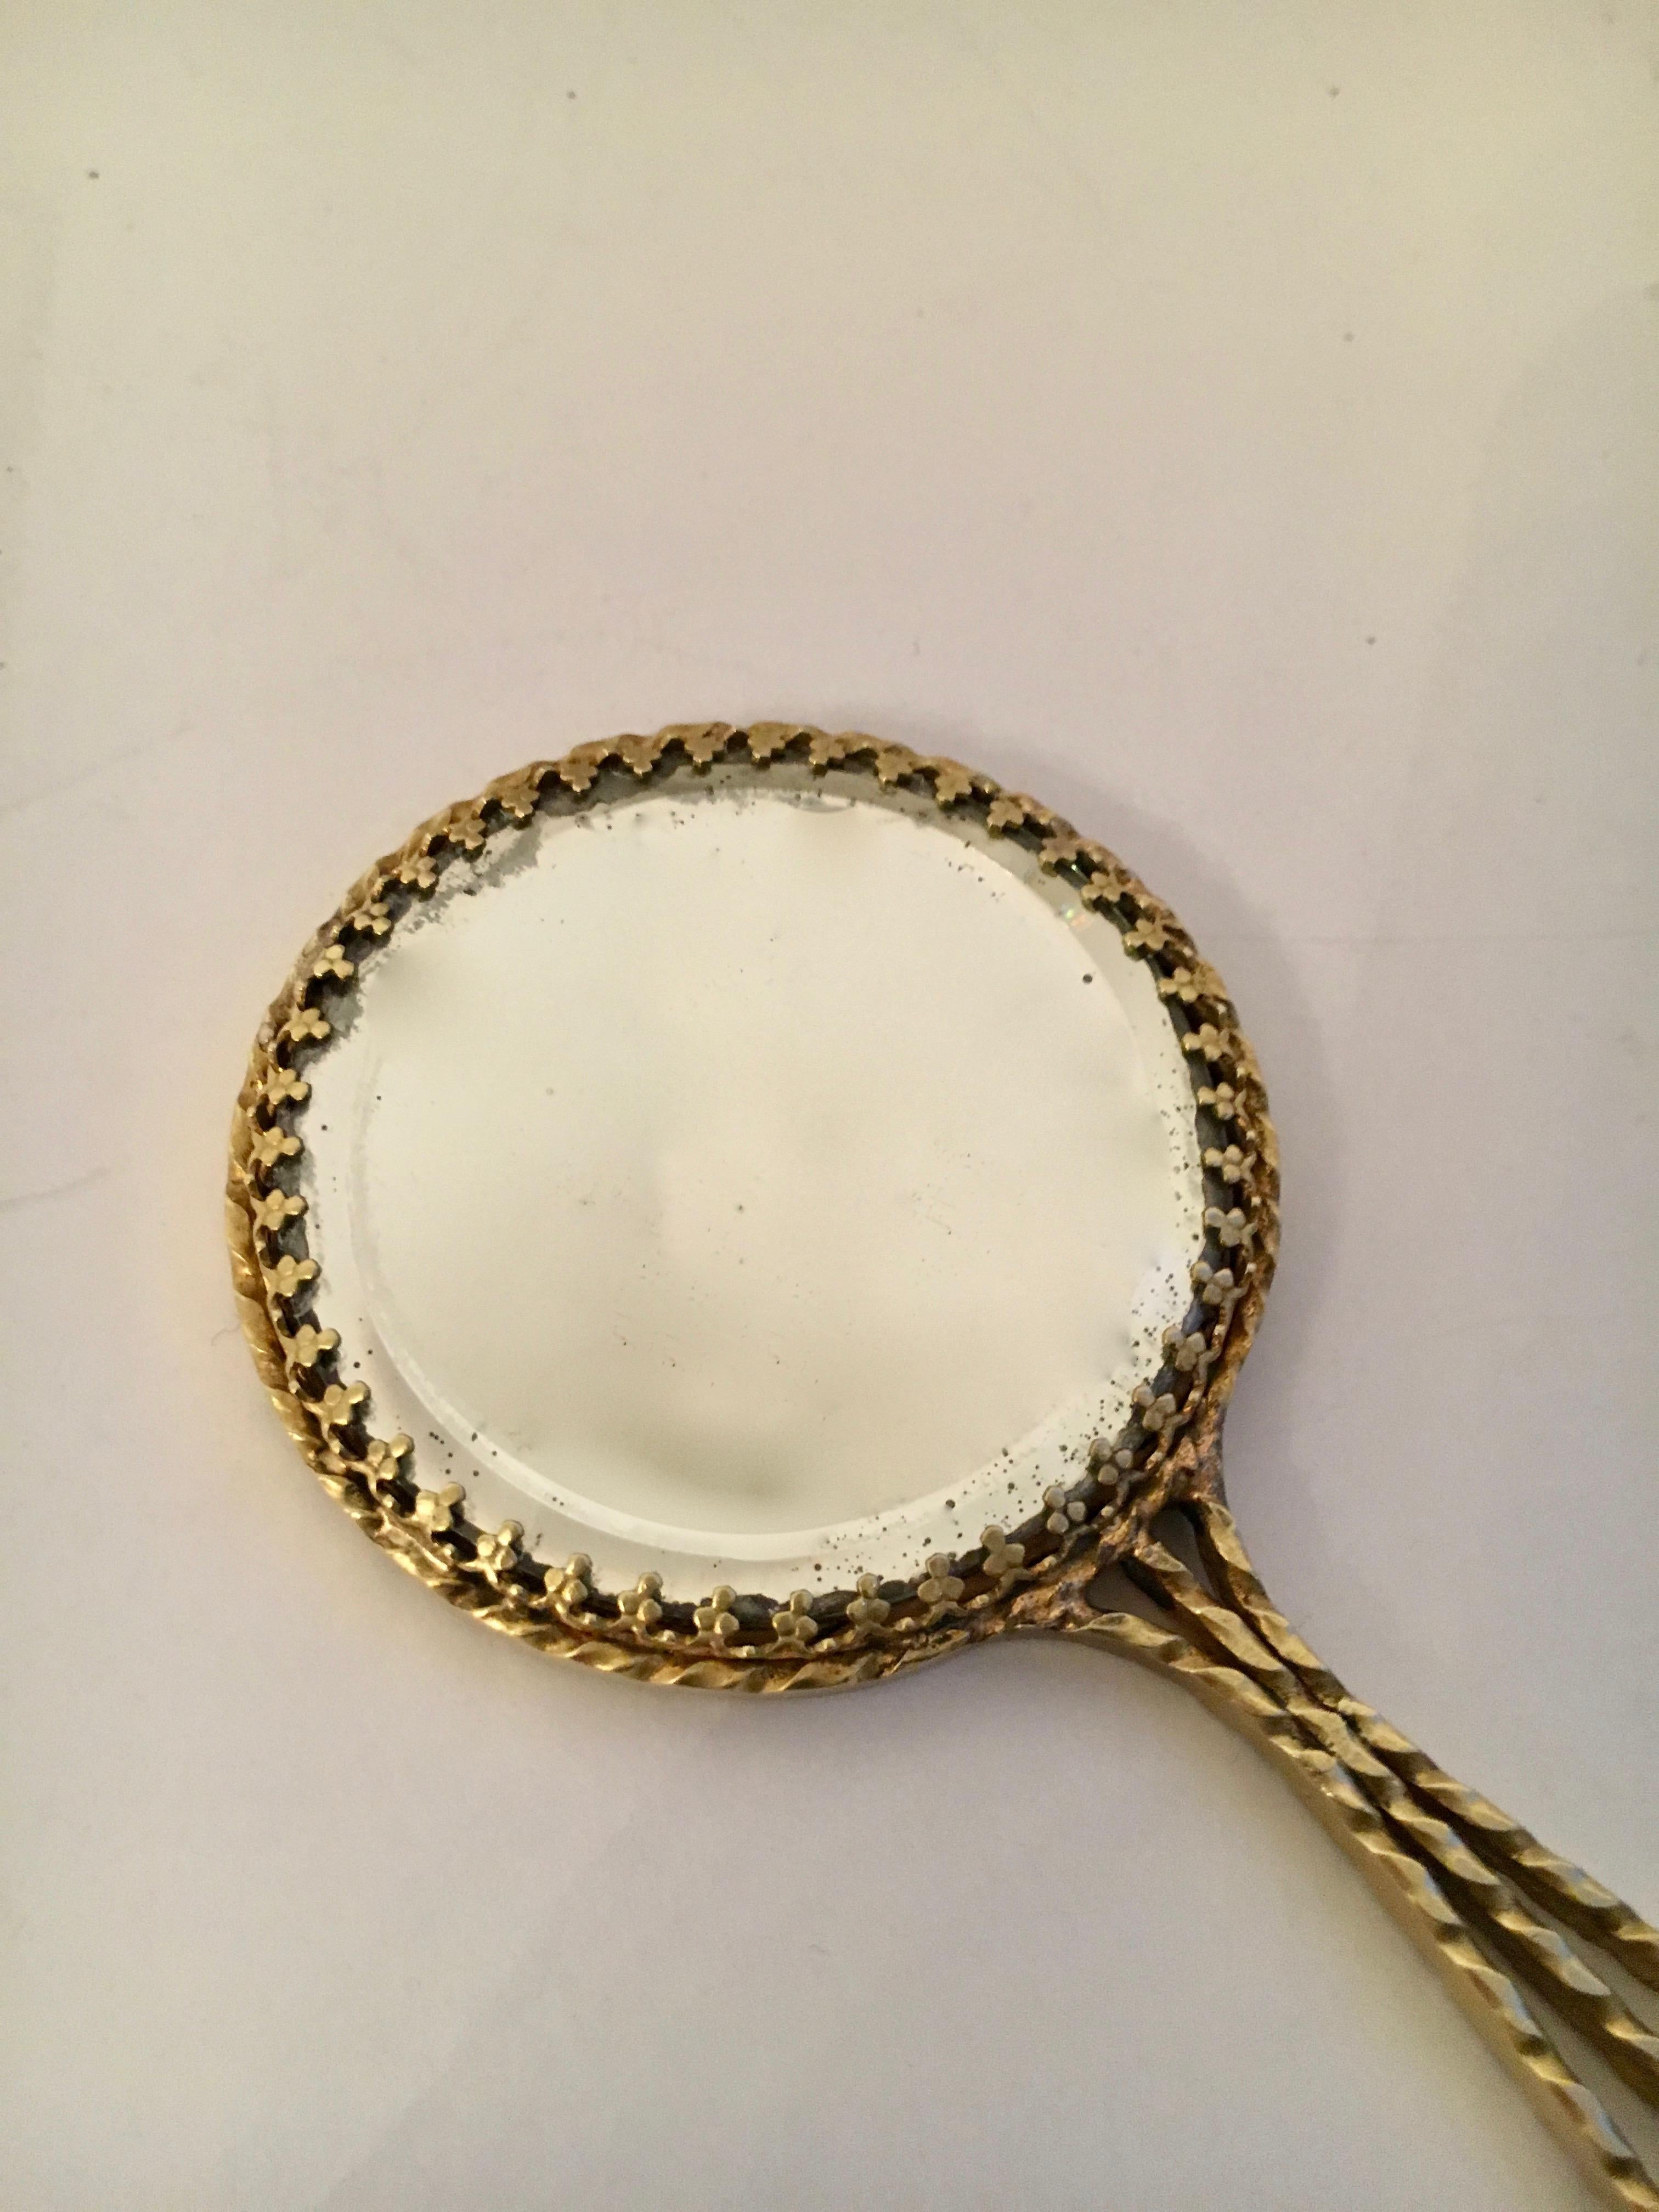 Brass pocket mirror - the small mirror is great for the pocket, bag, back pack or desk. Double sided with mirror on both sides the same, no magnification. Some hazing on the mirror, but we believe it adds to the elegance and, in no way, detracts